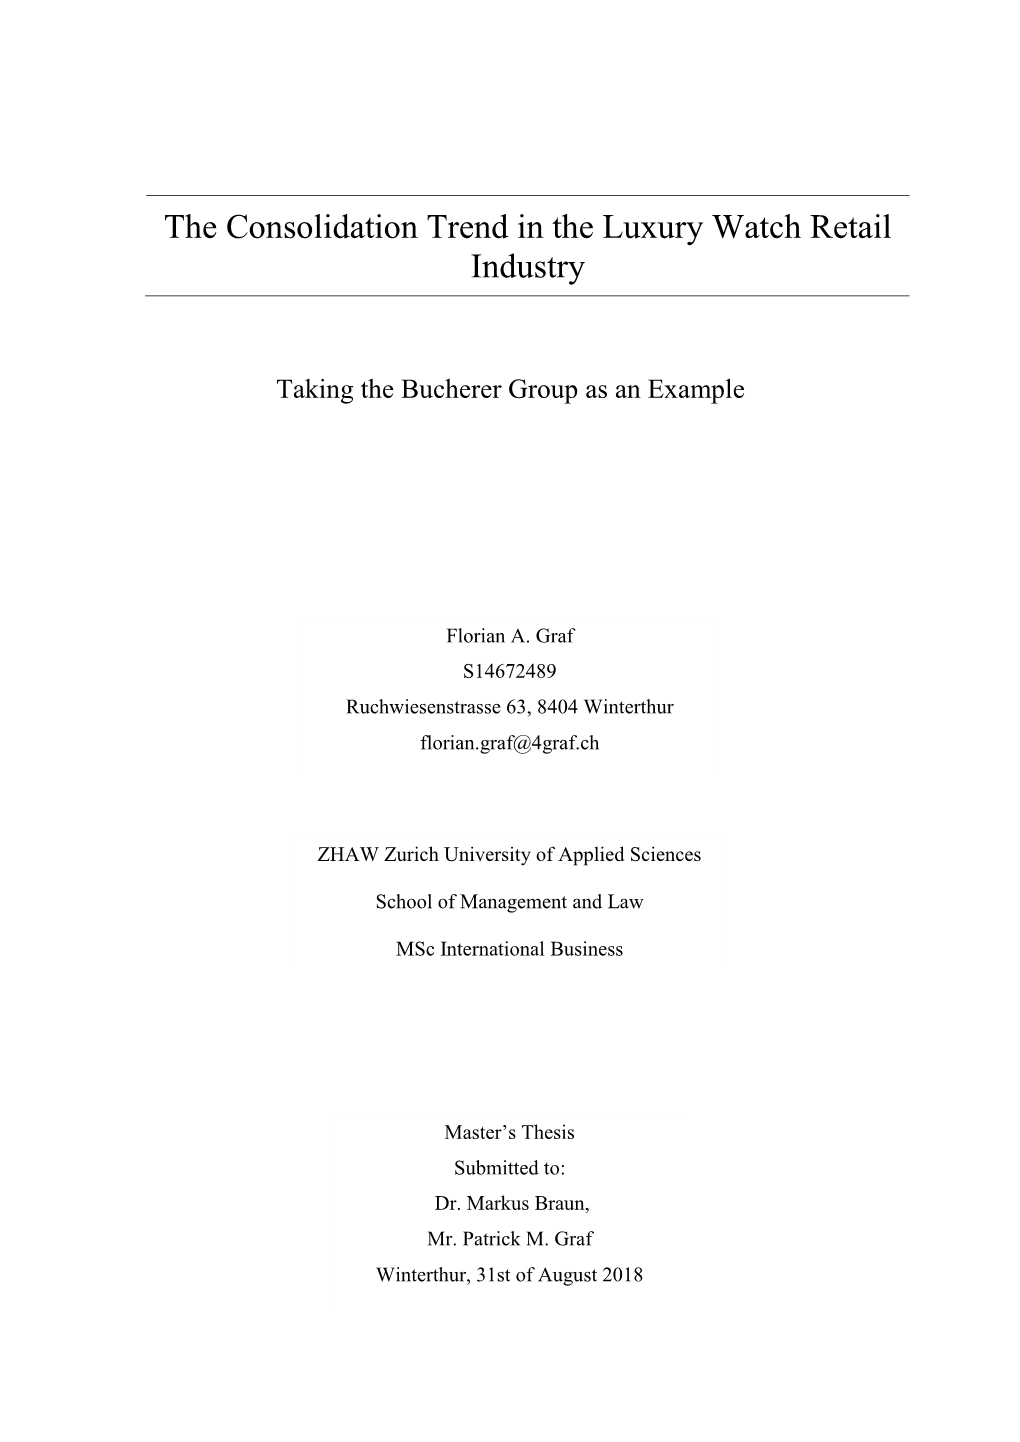 The Consolidation Trend in the Luxury Watch Retail Industry